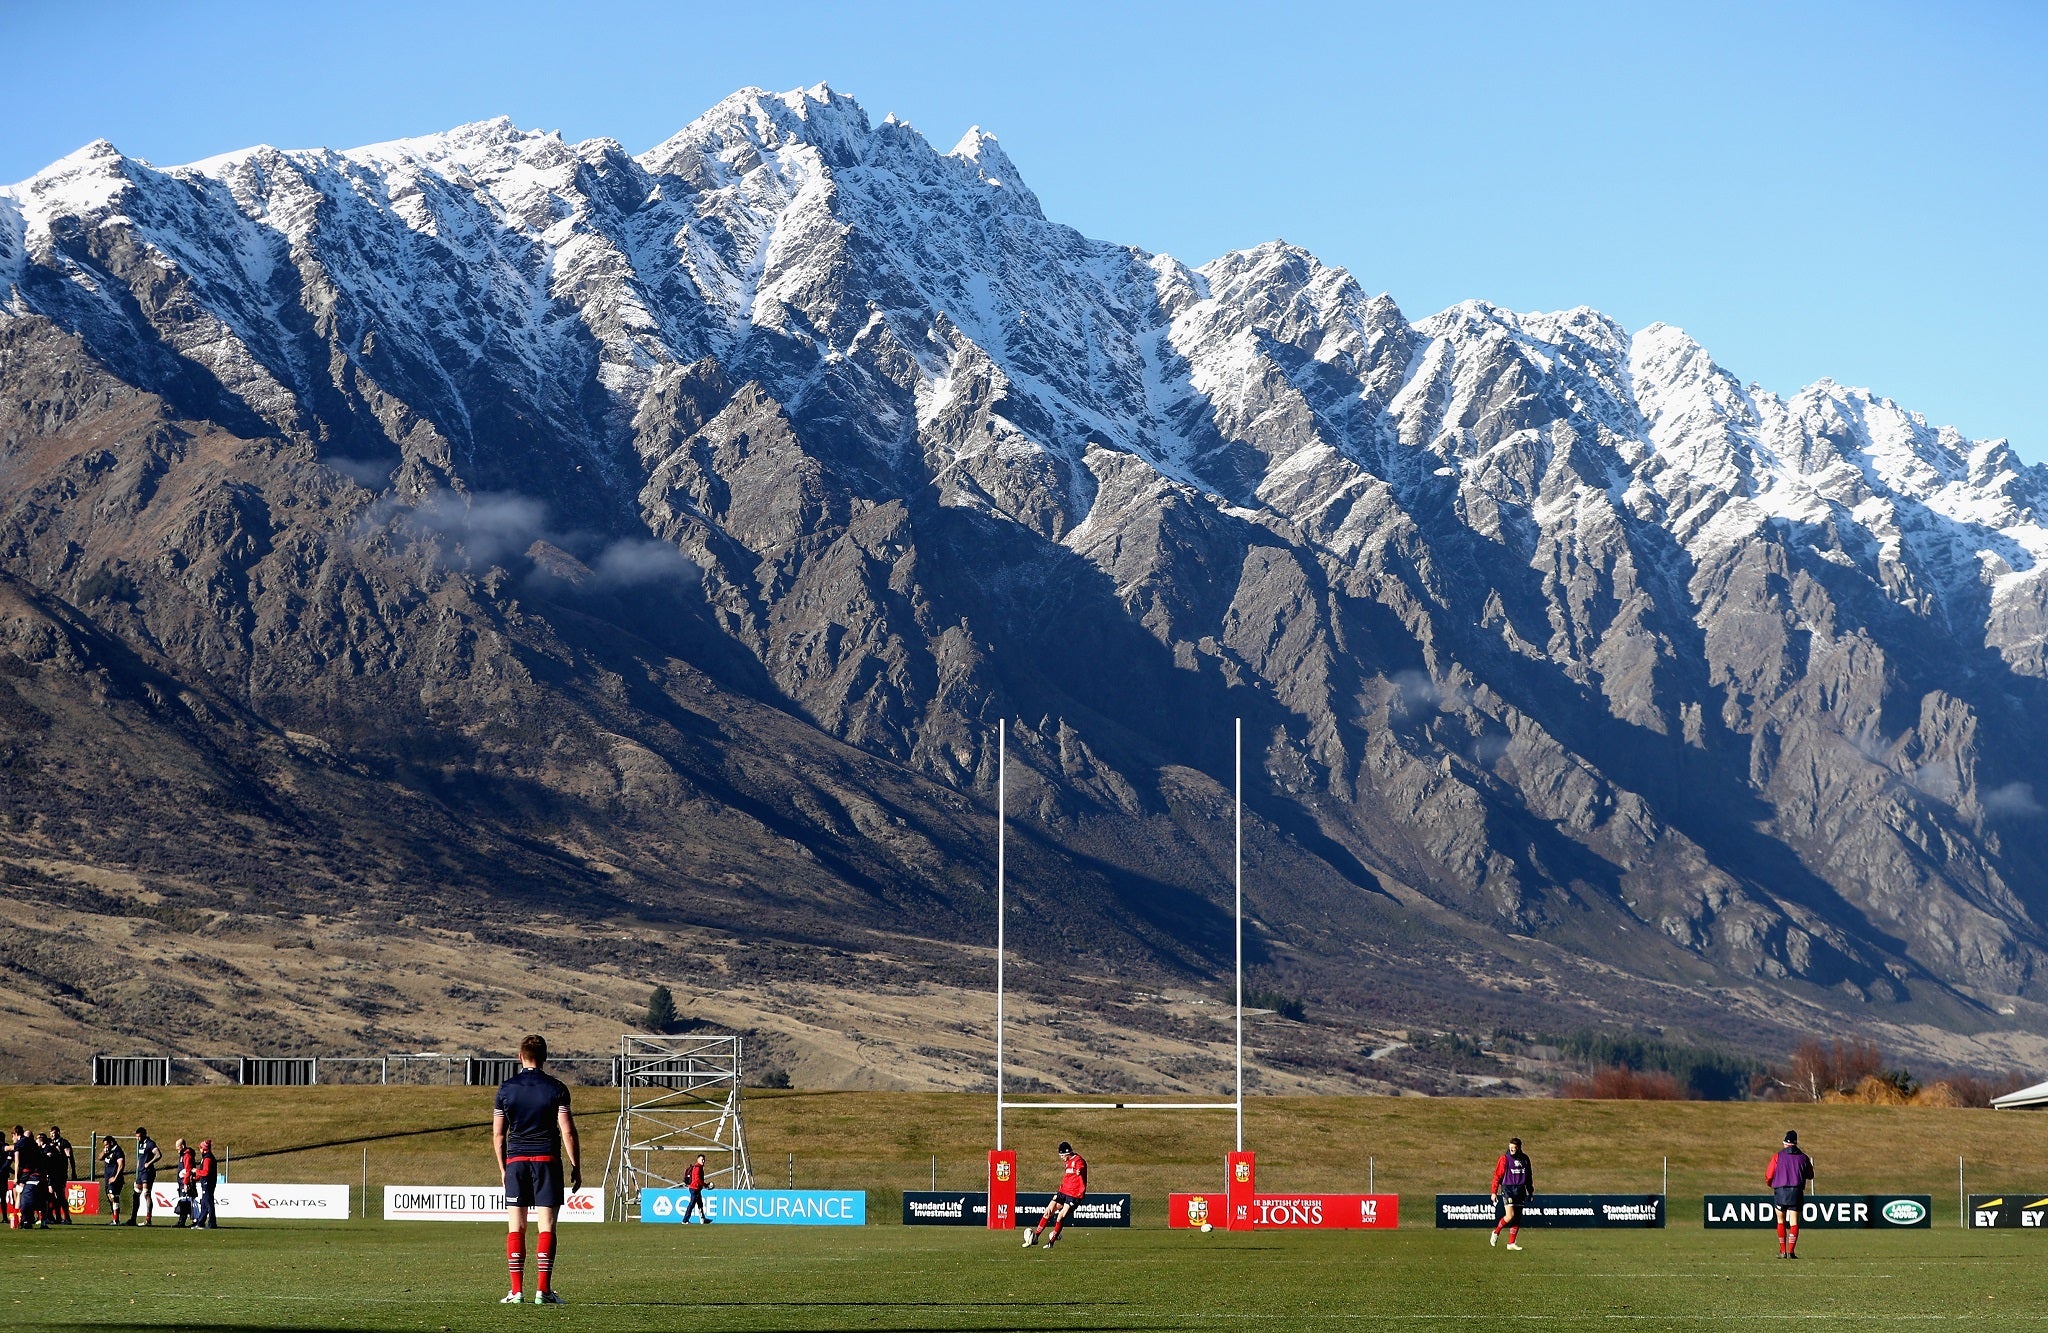 The Lions squad enjoyed a picturesque training session on Wednesday in Queenstown